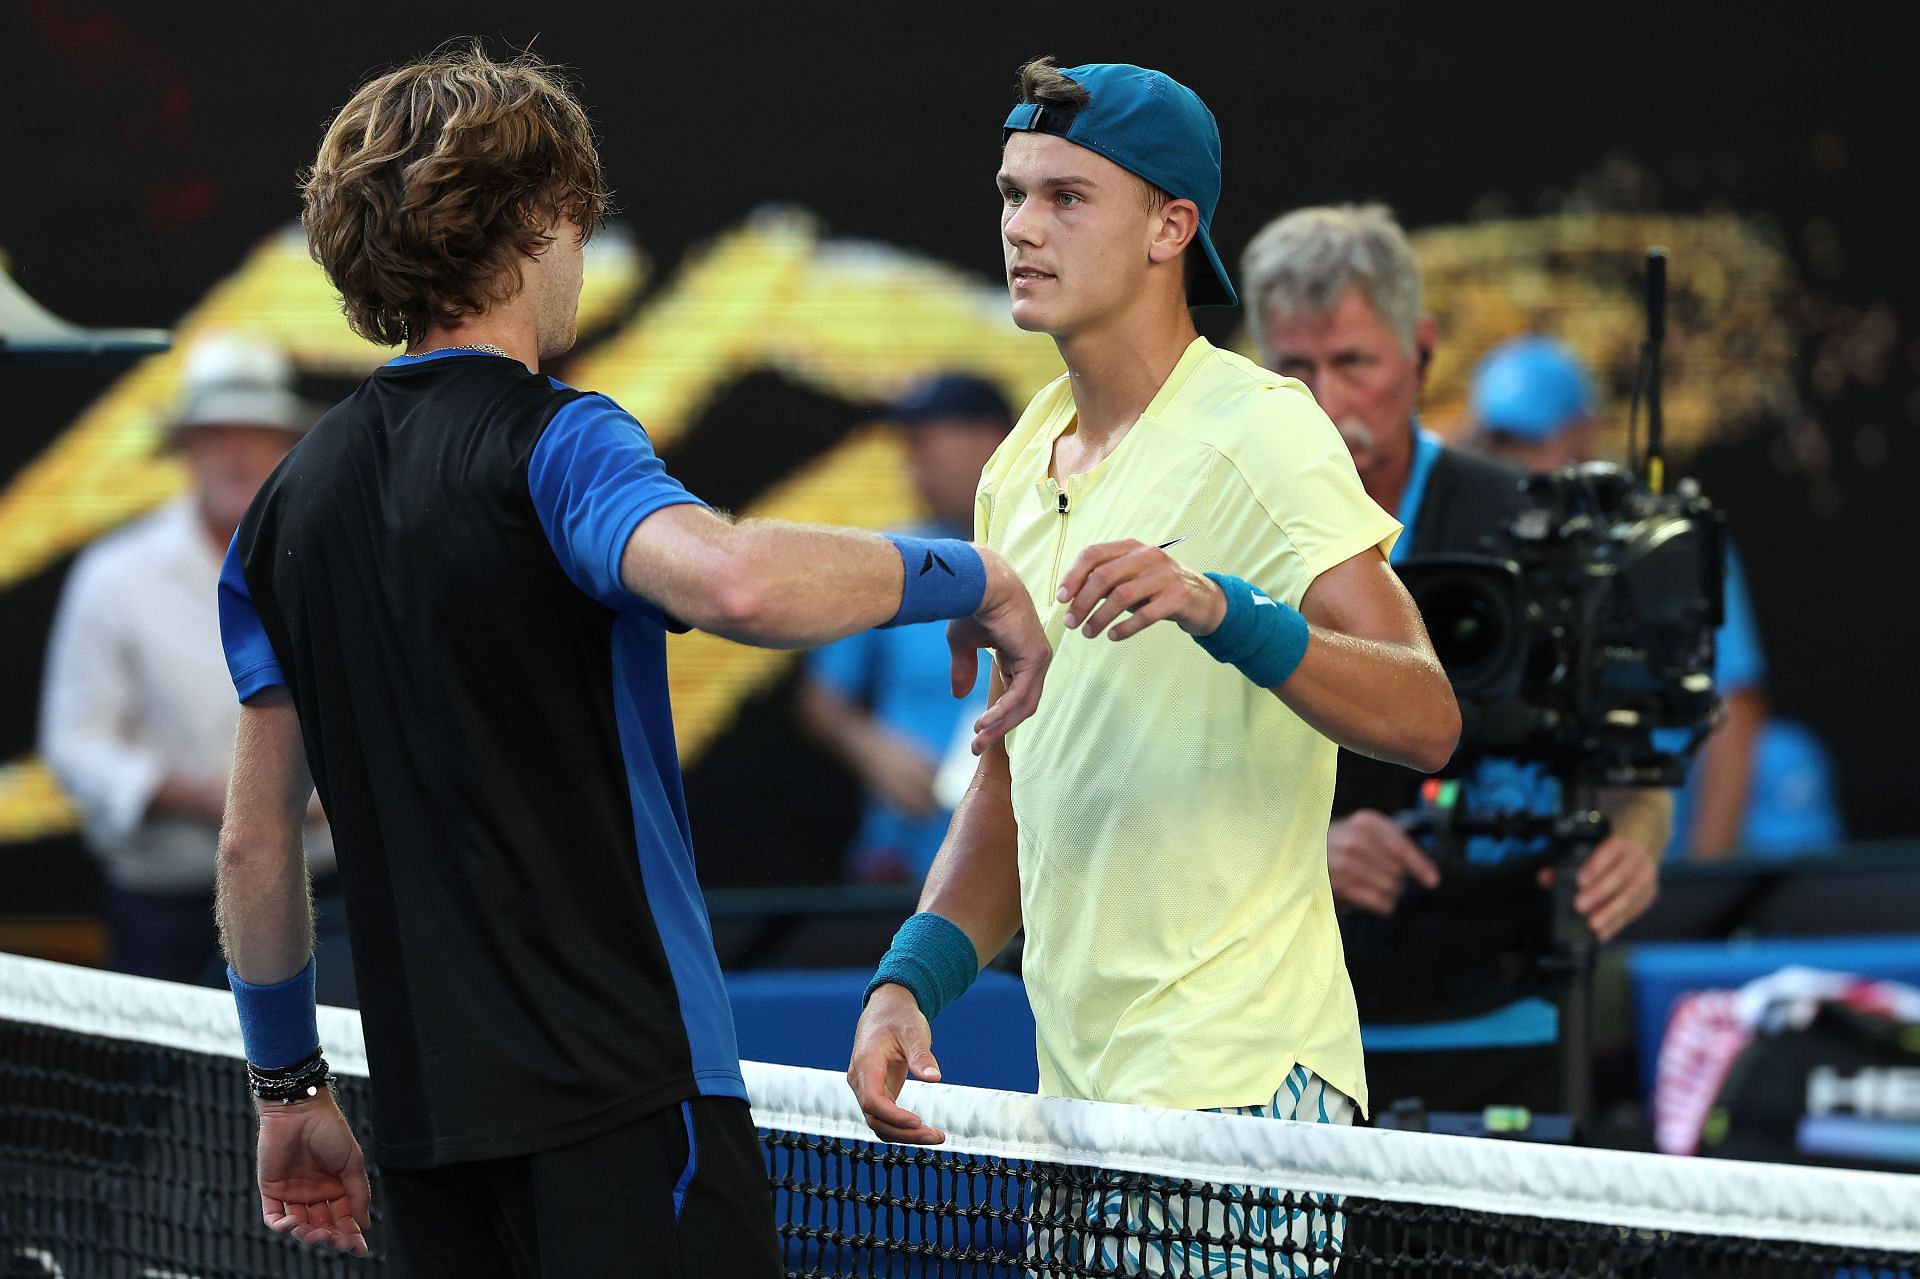 Rune lost a cliffhanger against Andrey Rublev at the 2023 Australian Open